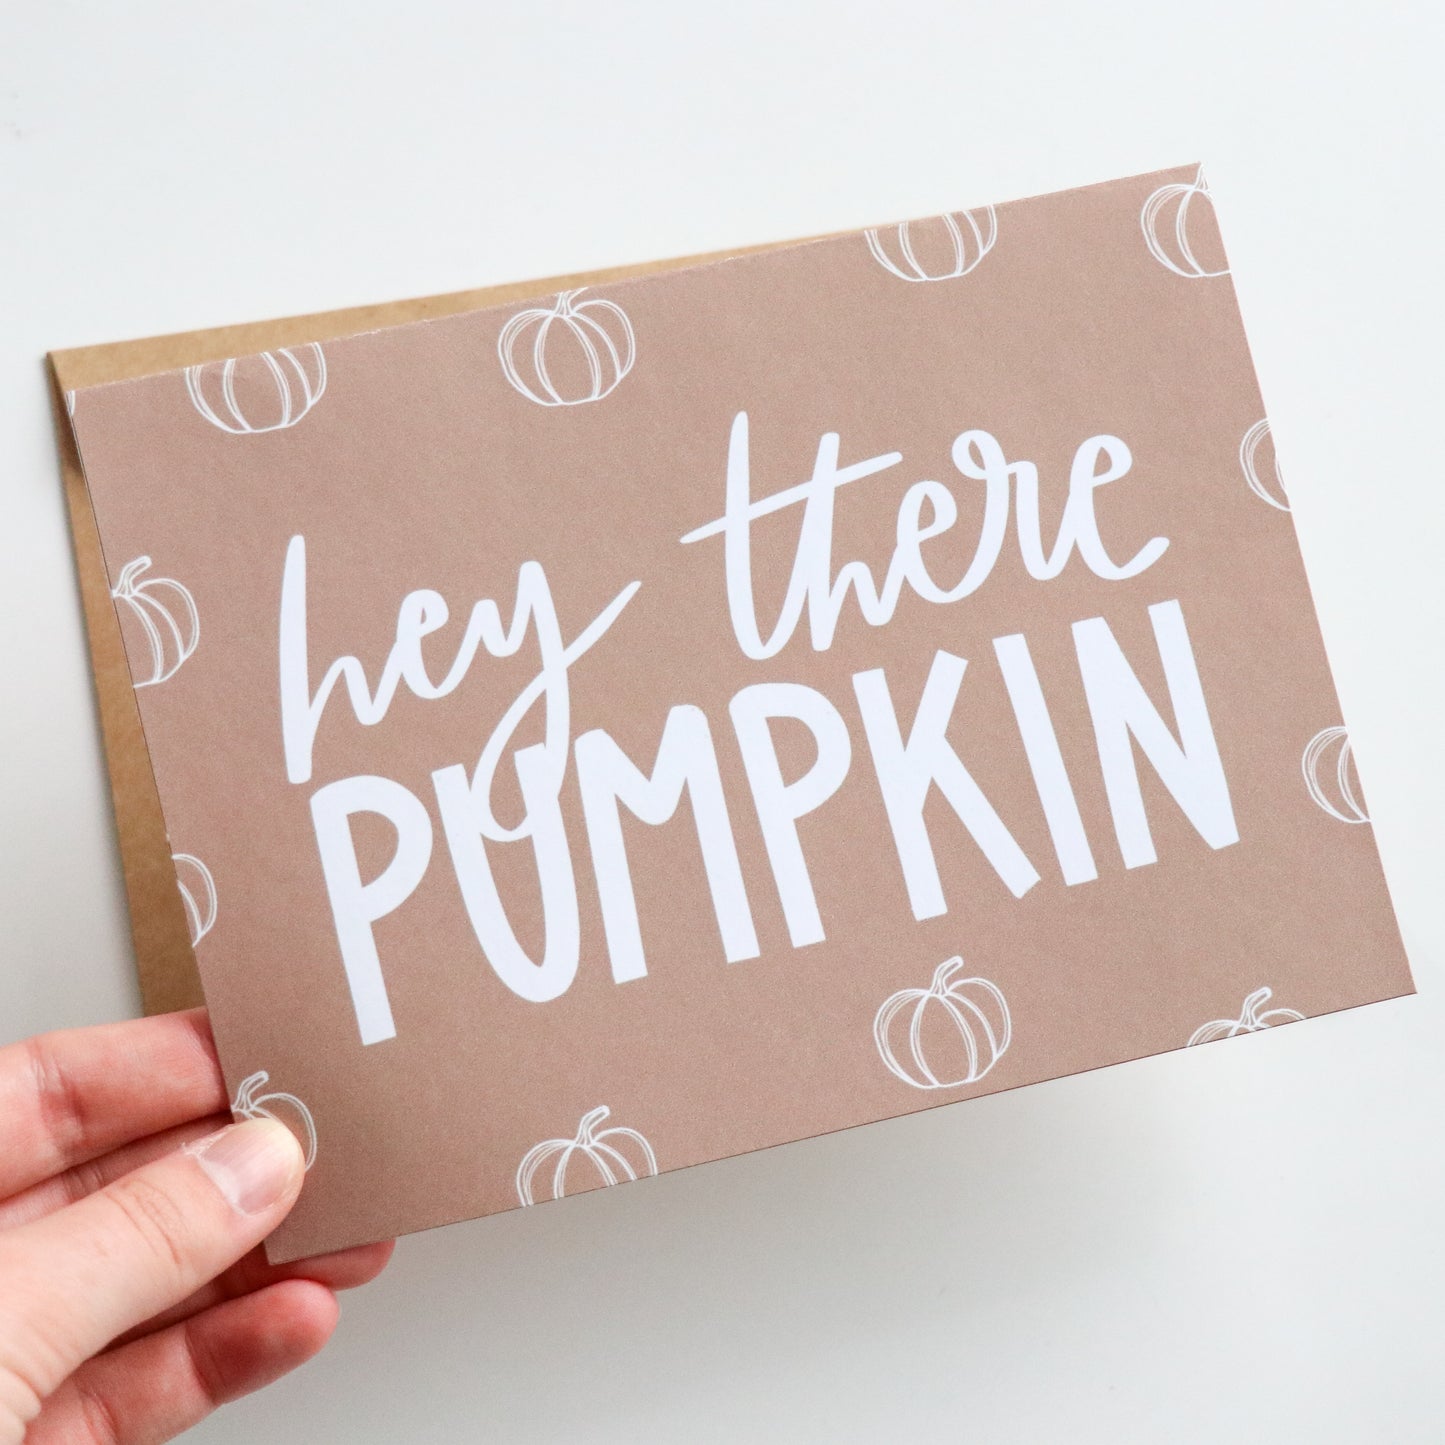 Hey There Pumpkin Card